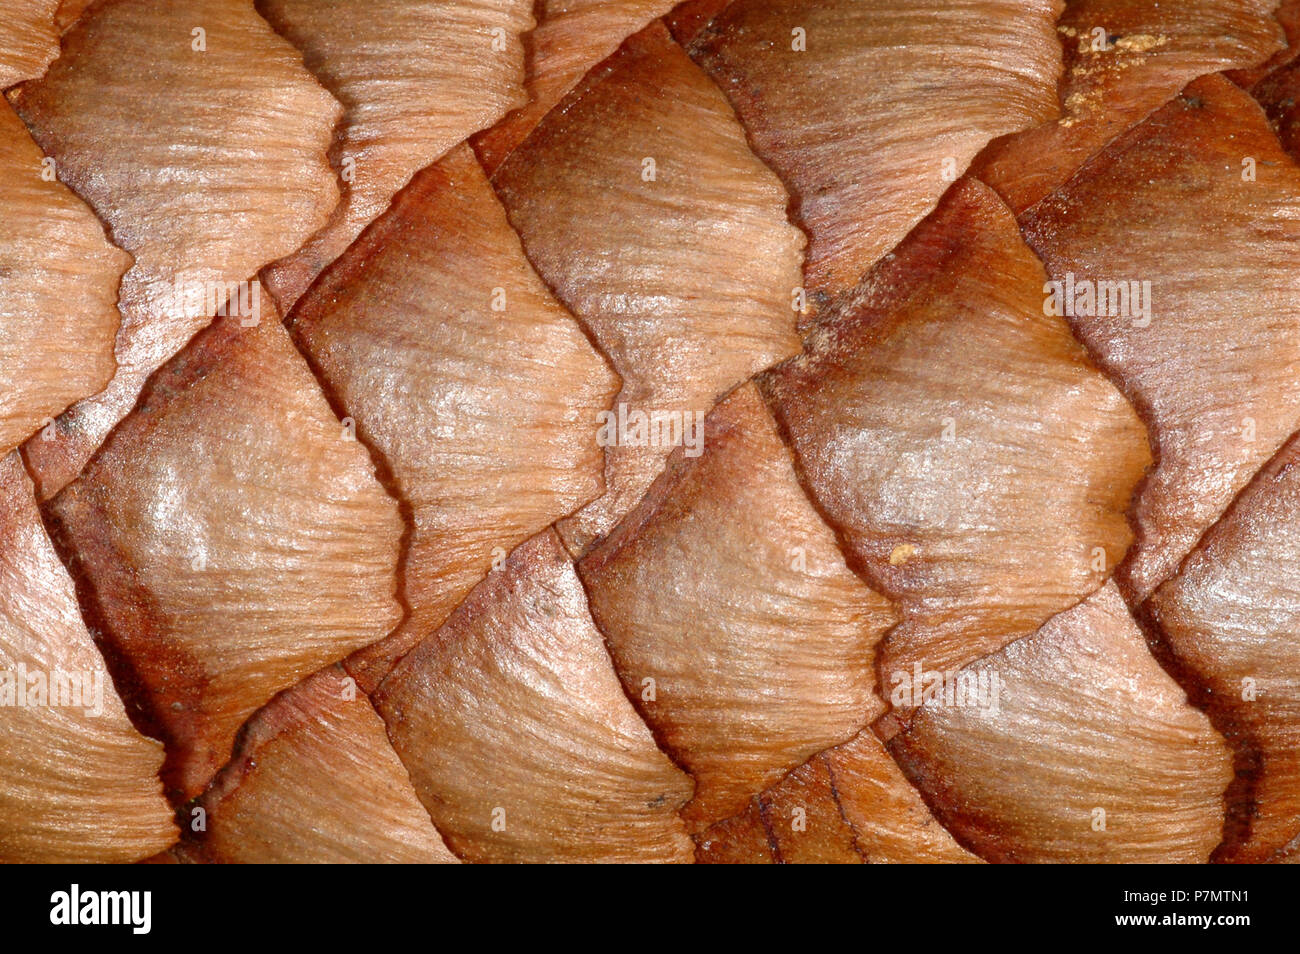 Close-up of strobile of Norway Spruce (Picea abies) Stock Photo